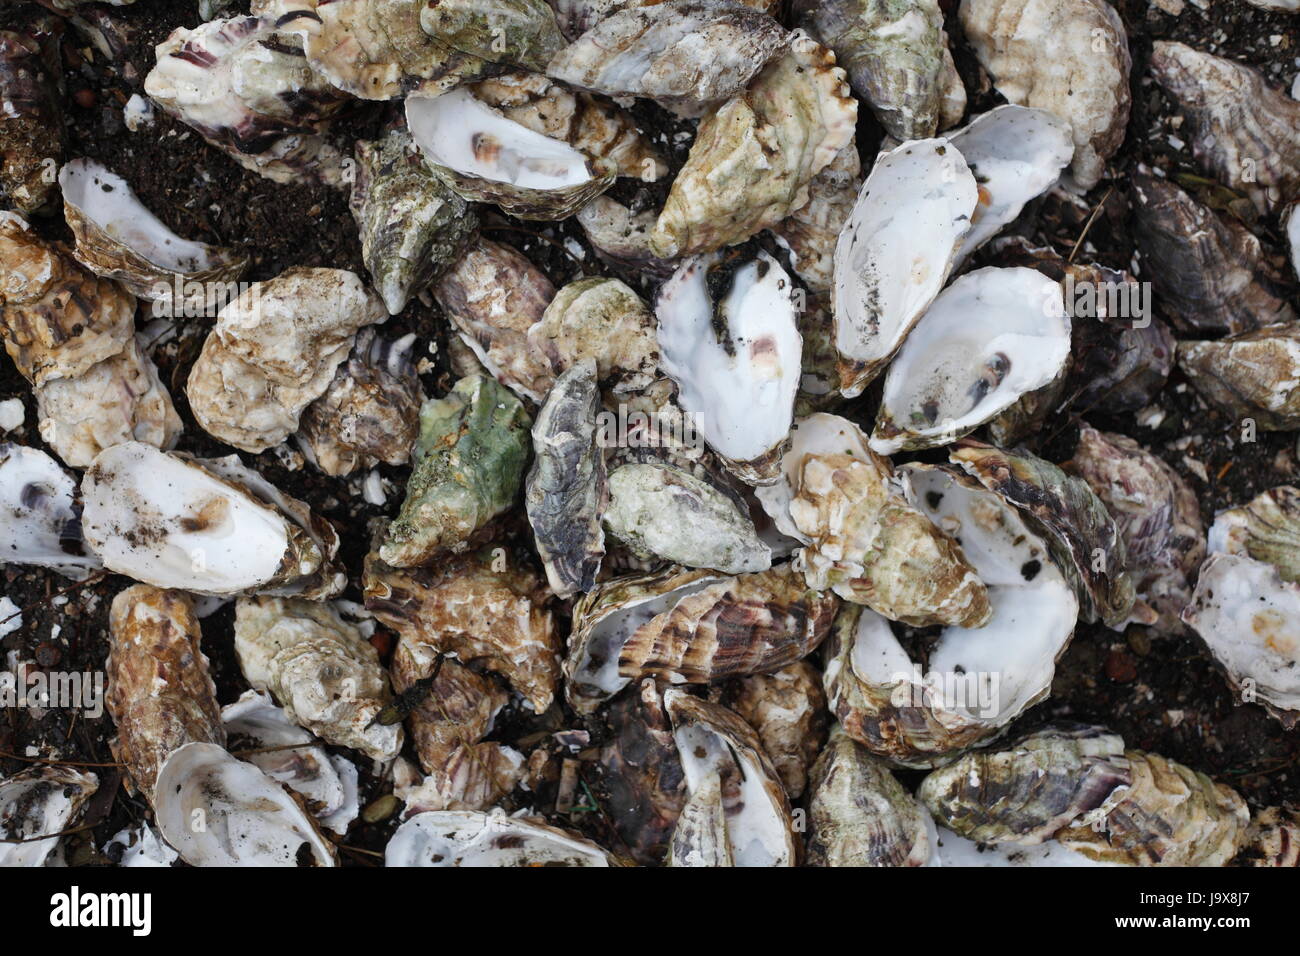 Mussels as floor covering Stock Photo